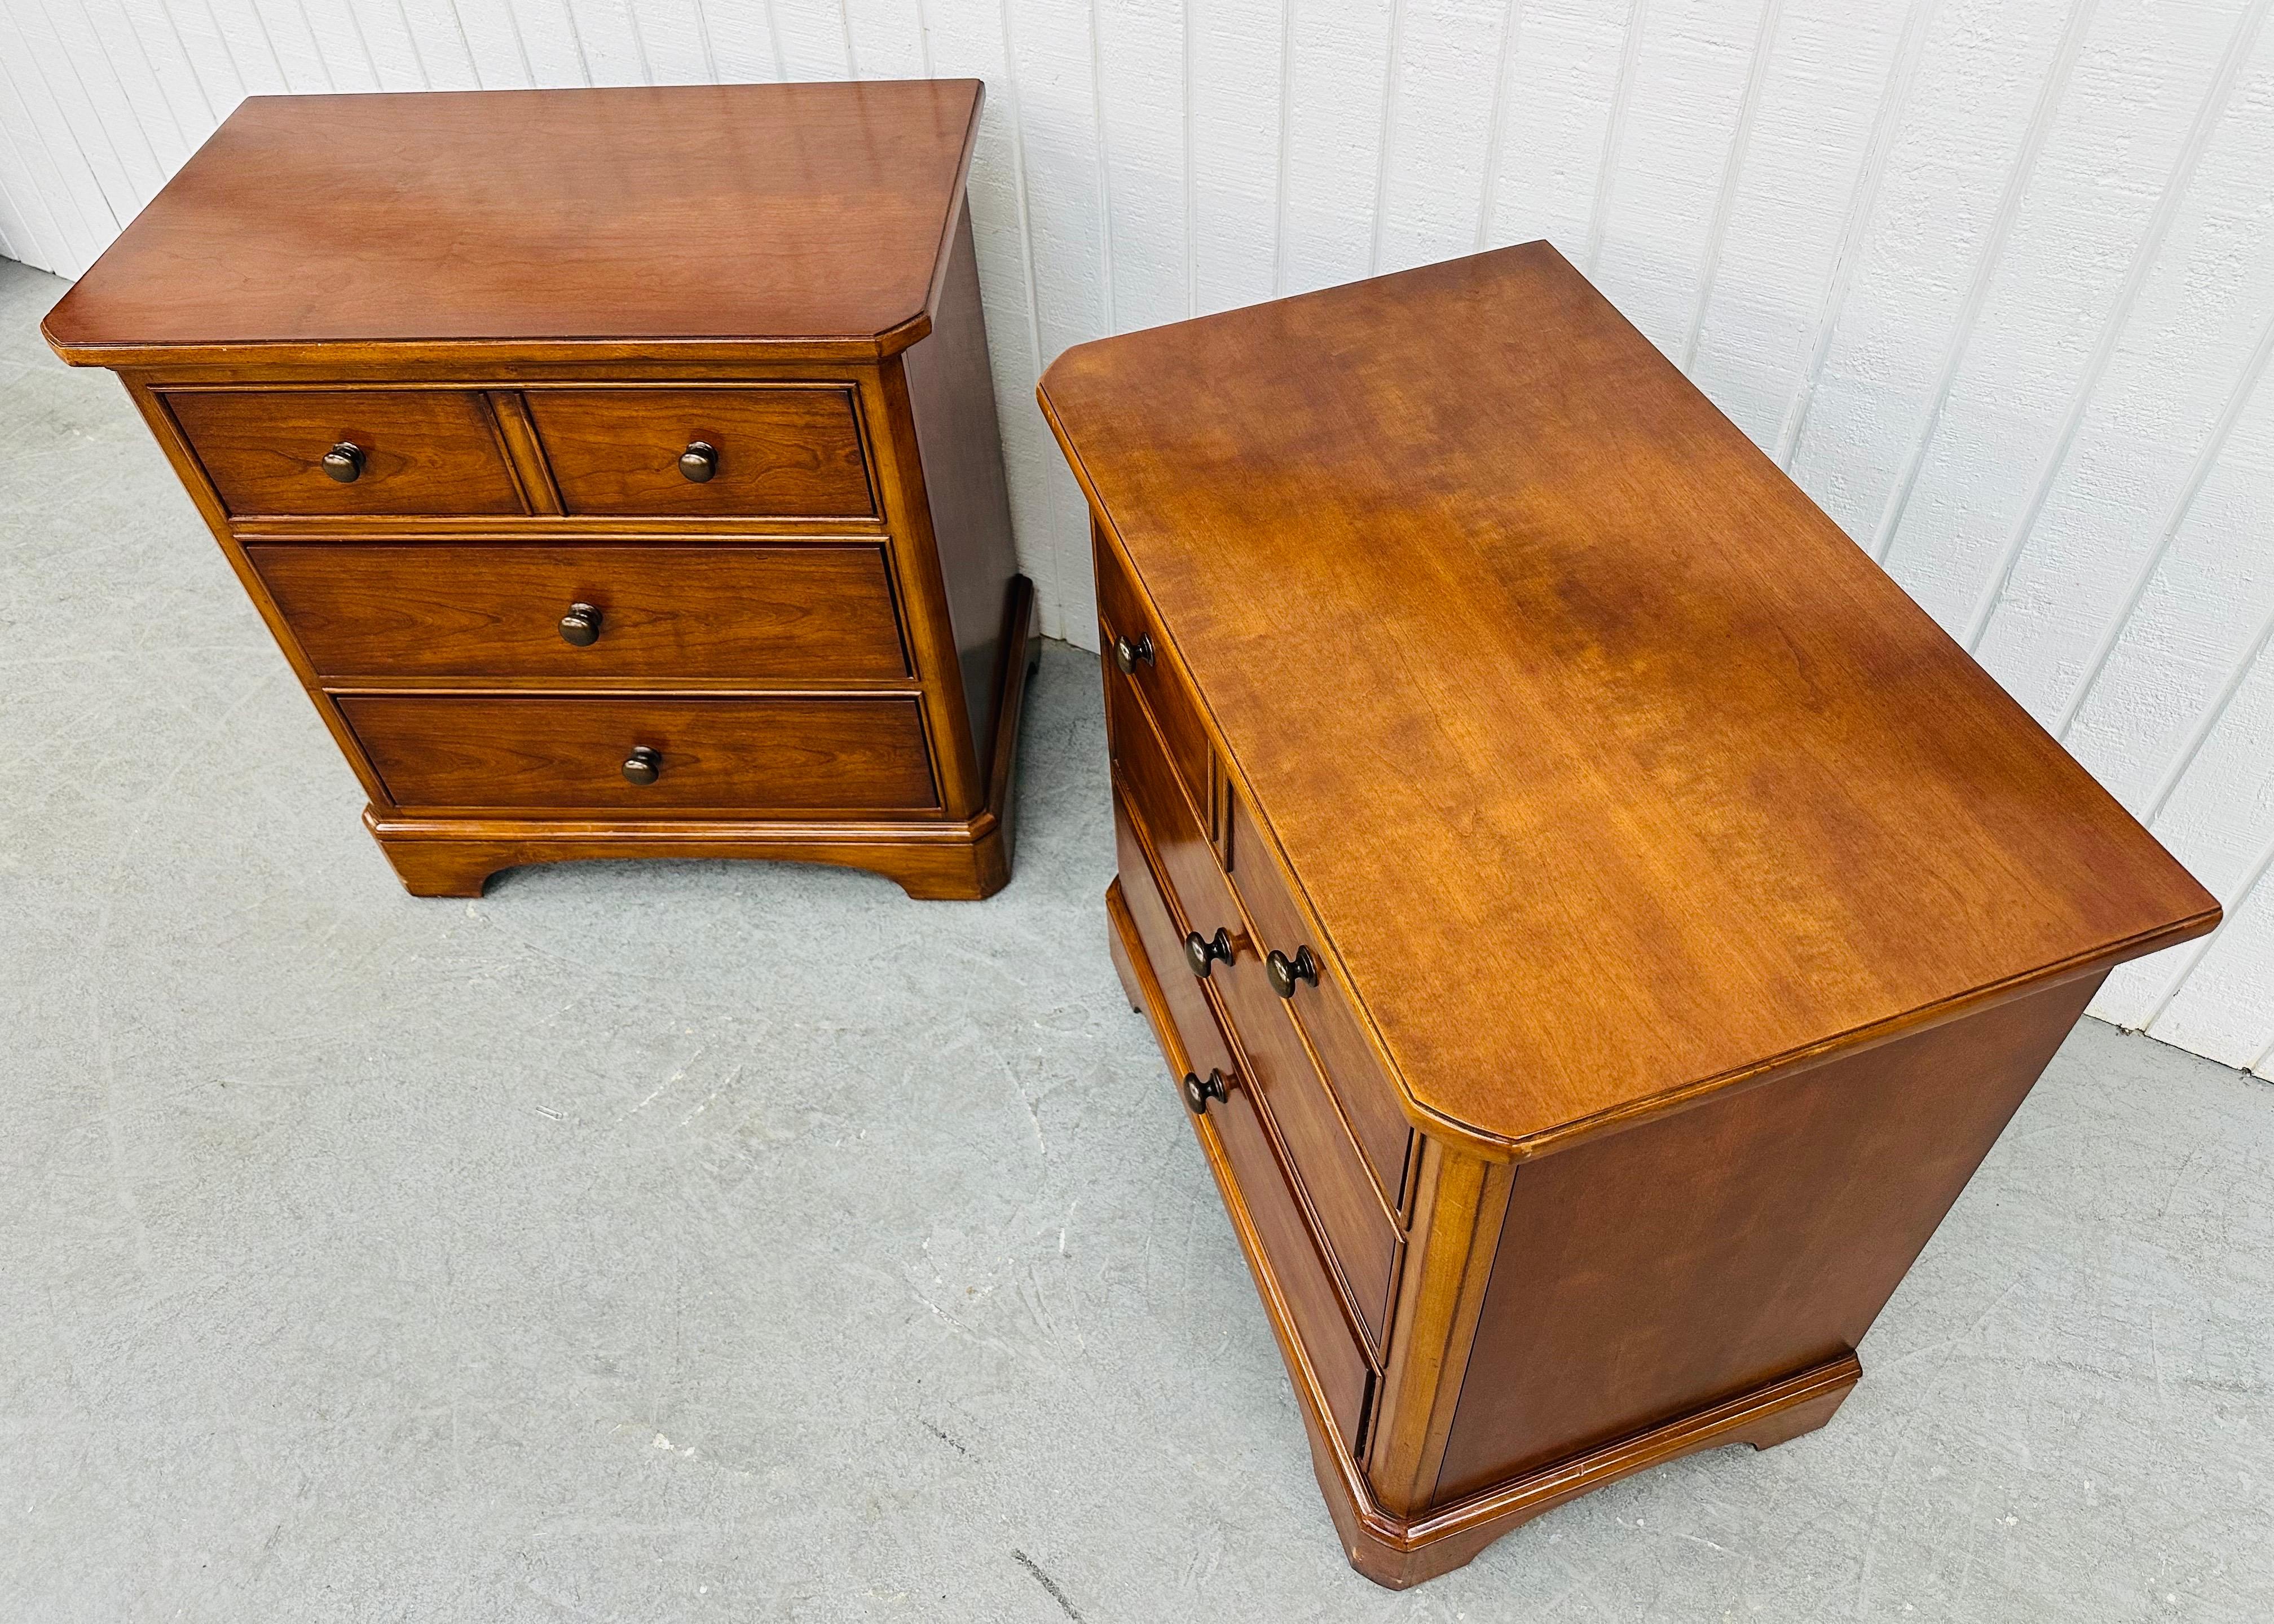 Brass Vintage Thomasville Cherry Bachelor Chest Nightstands - Set of 2 For Sale